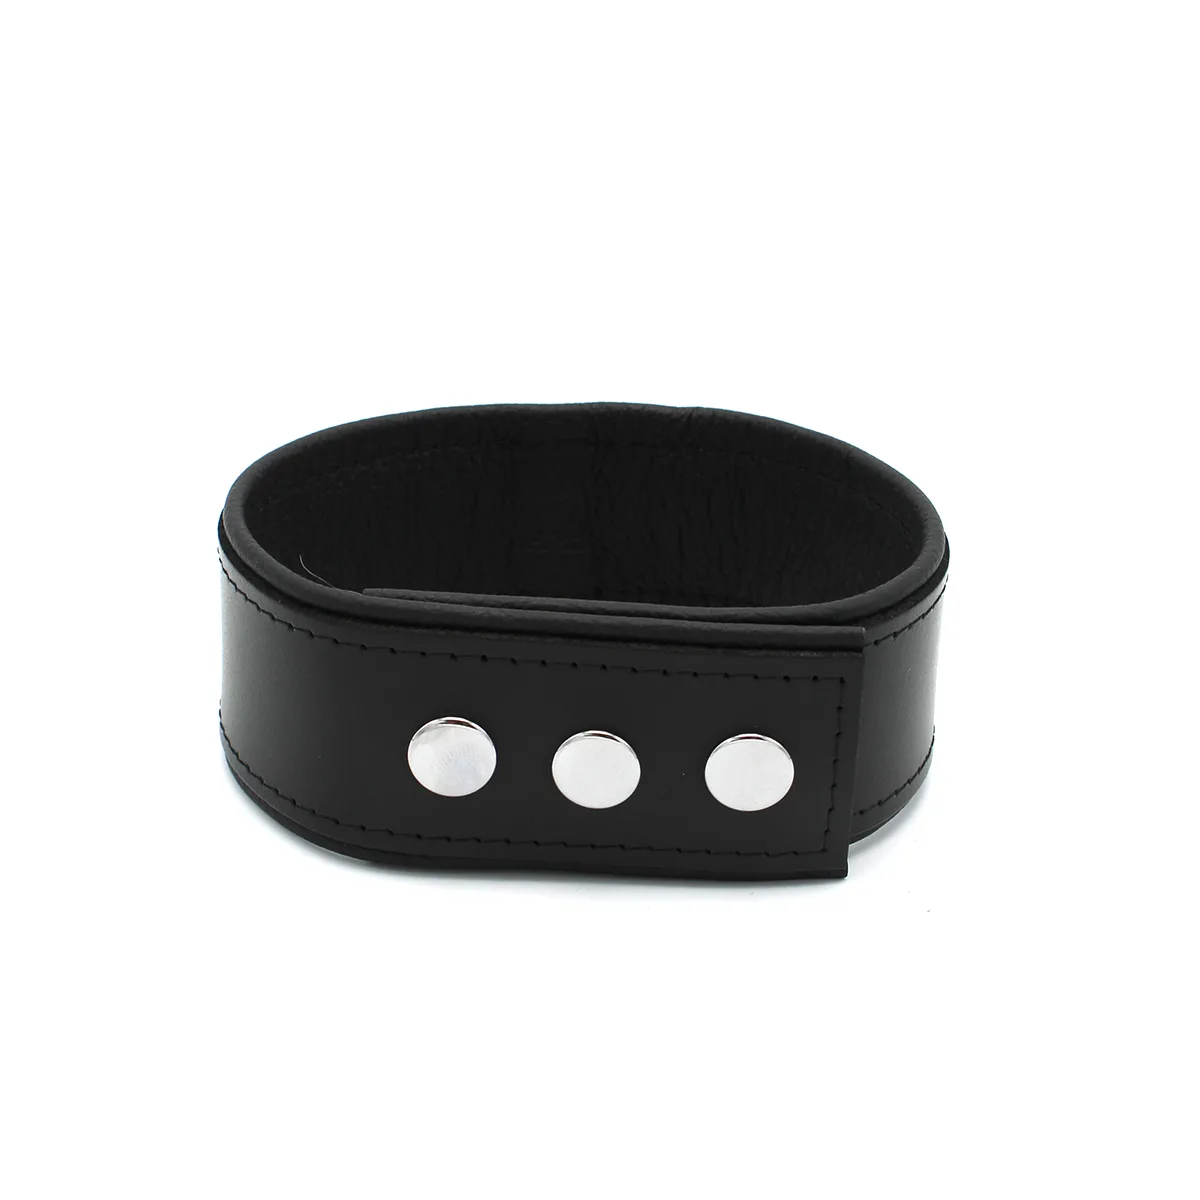 Leather-Push-Button-Collar-with-Metal-Shackle-134-KIO-0373-6